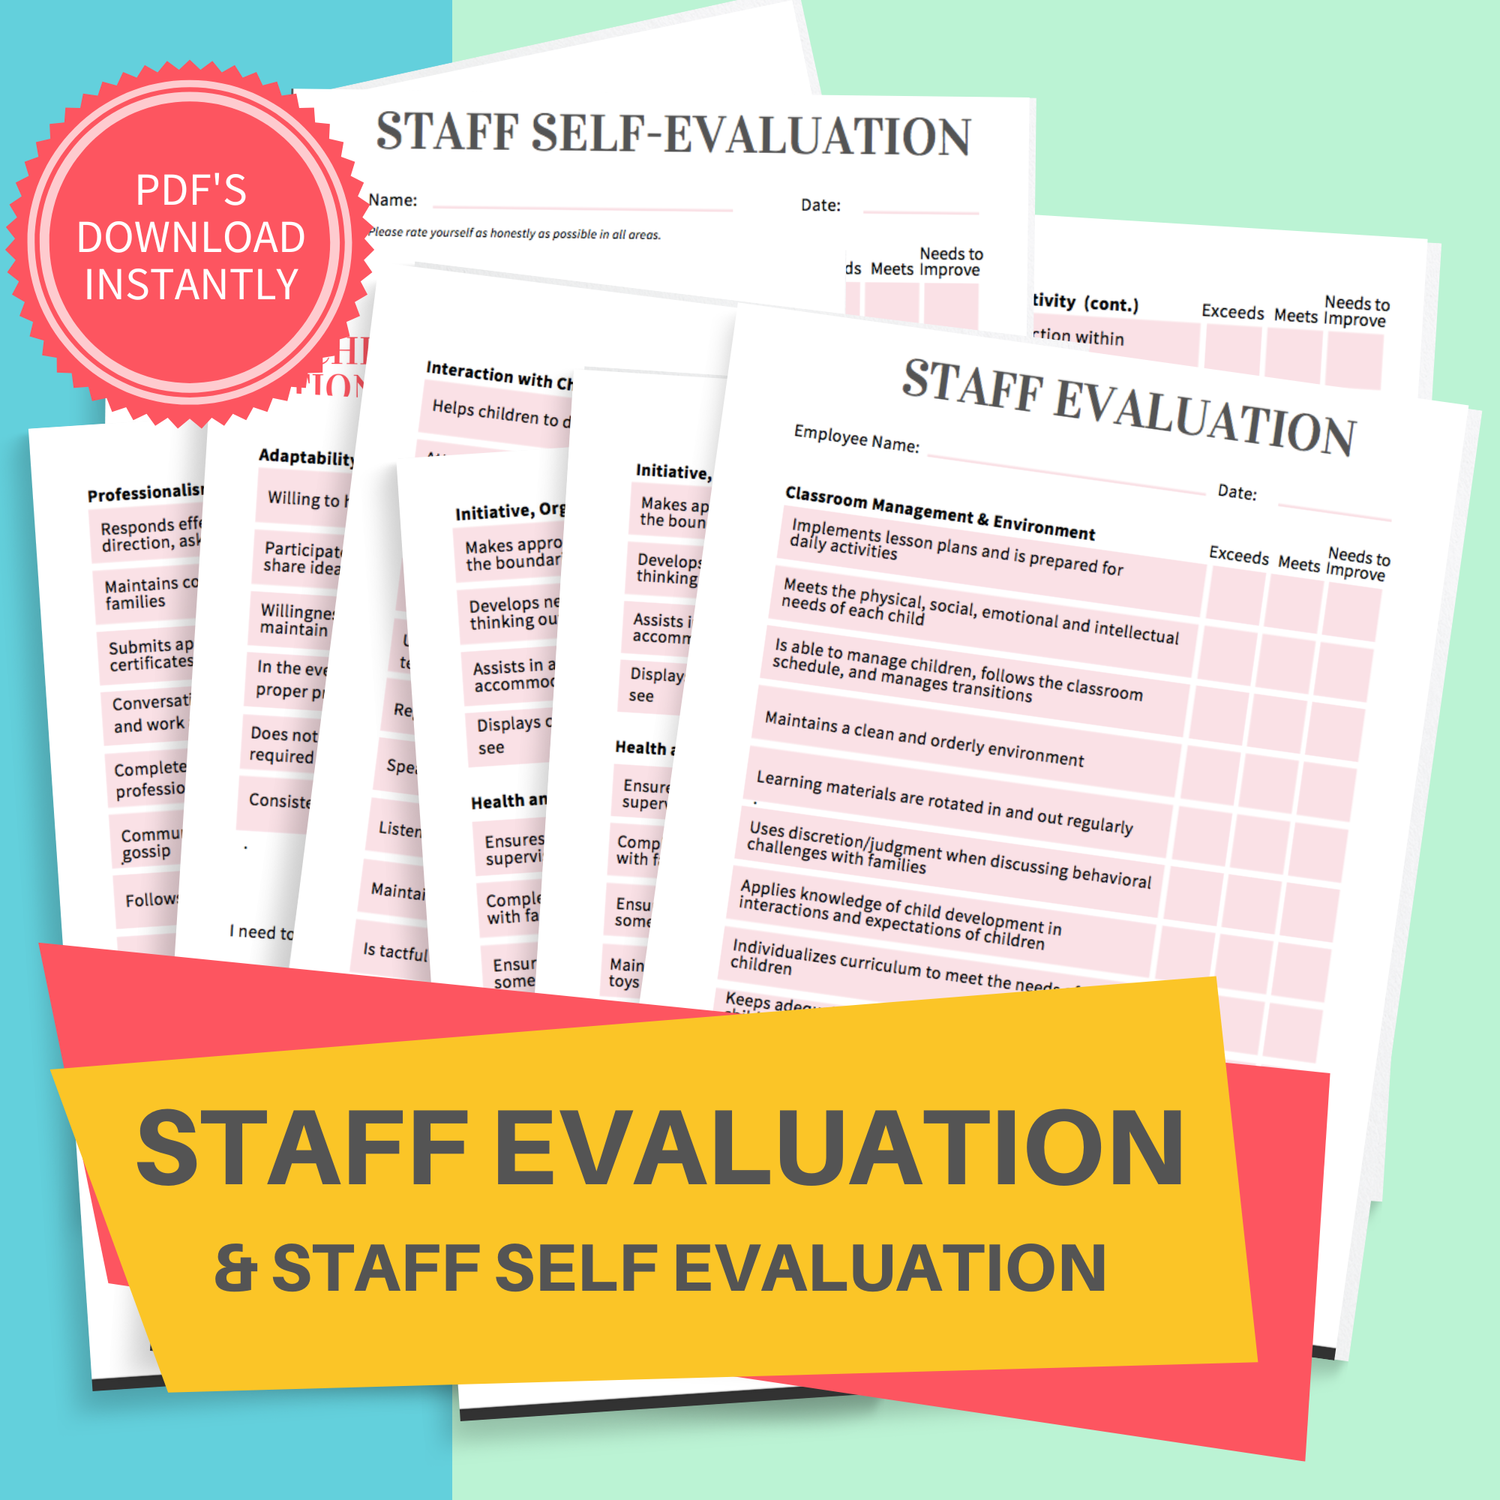 daycare-staff-evaluation-childcare-center-printable-employee-self